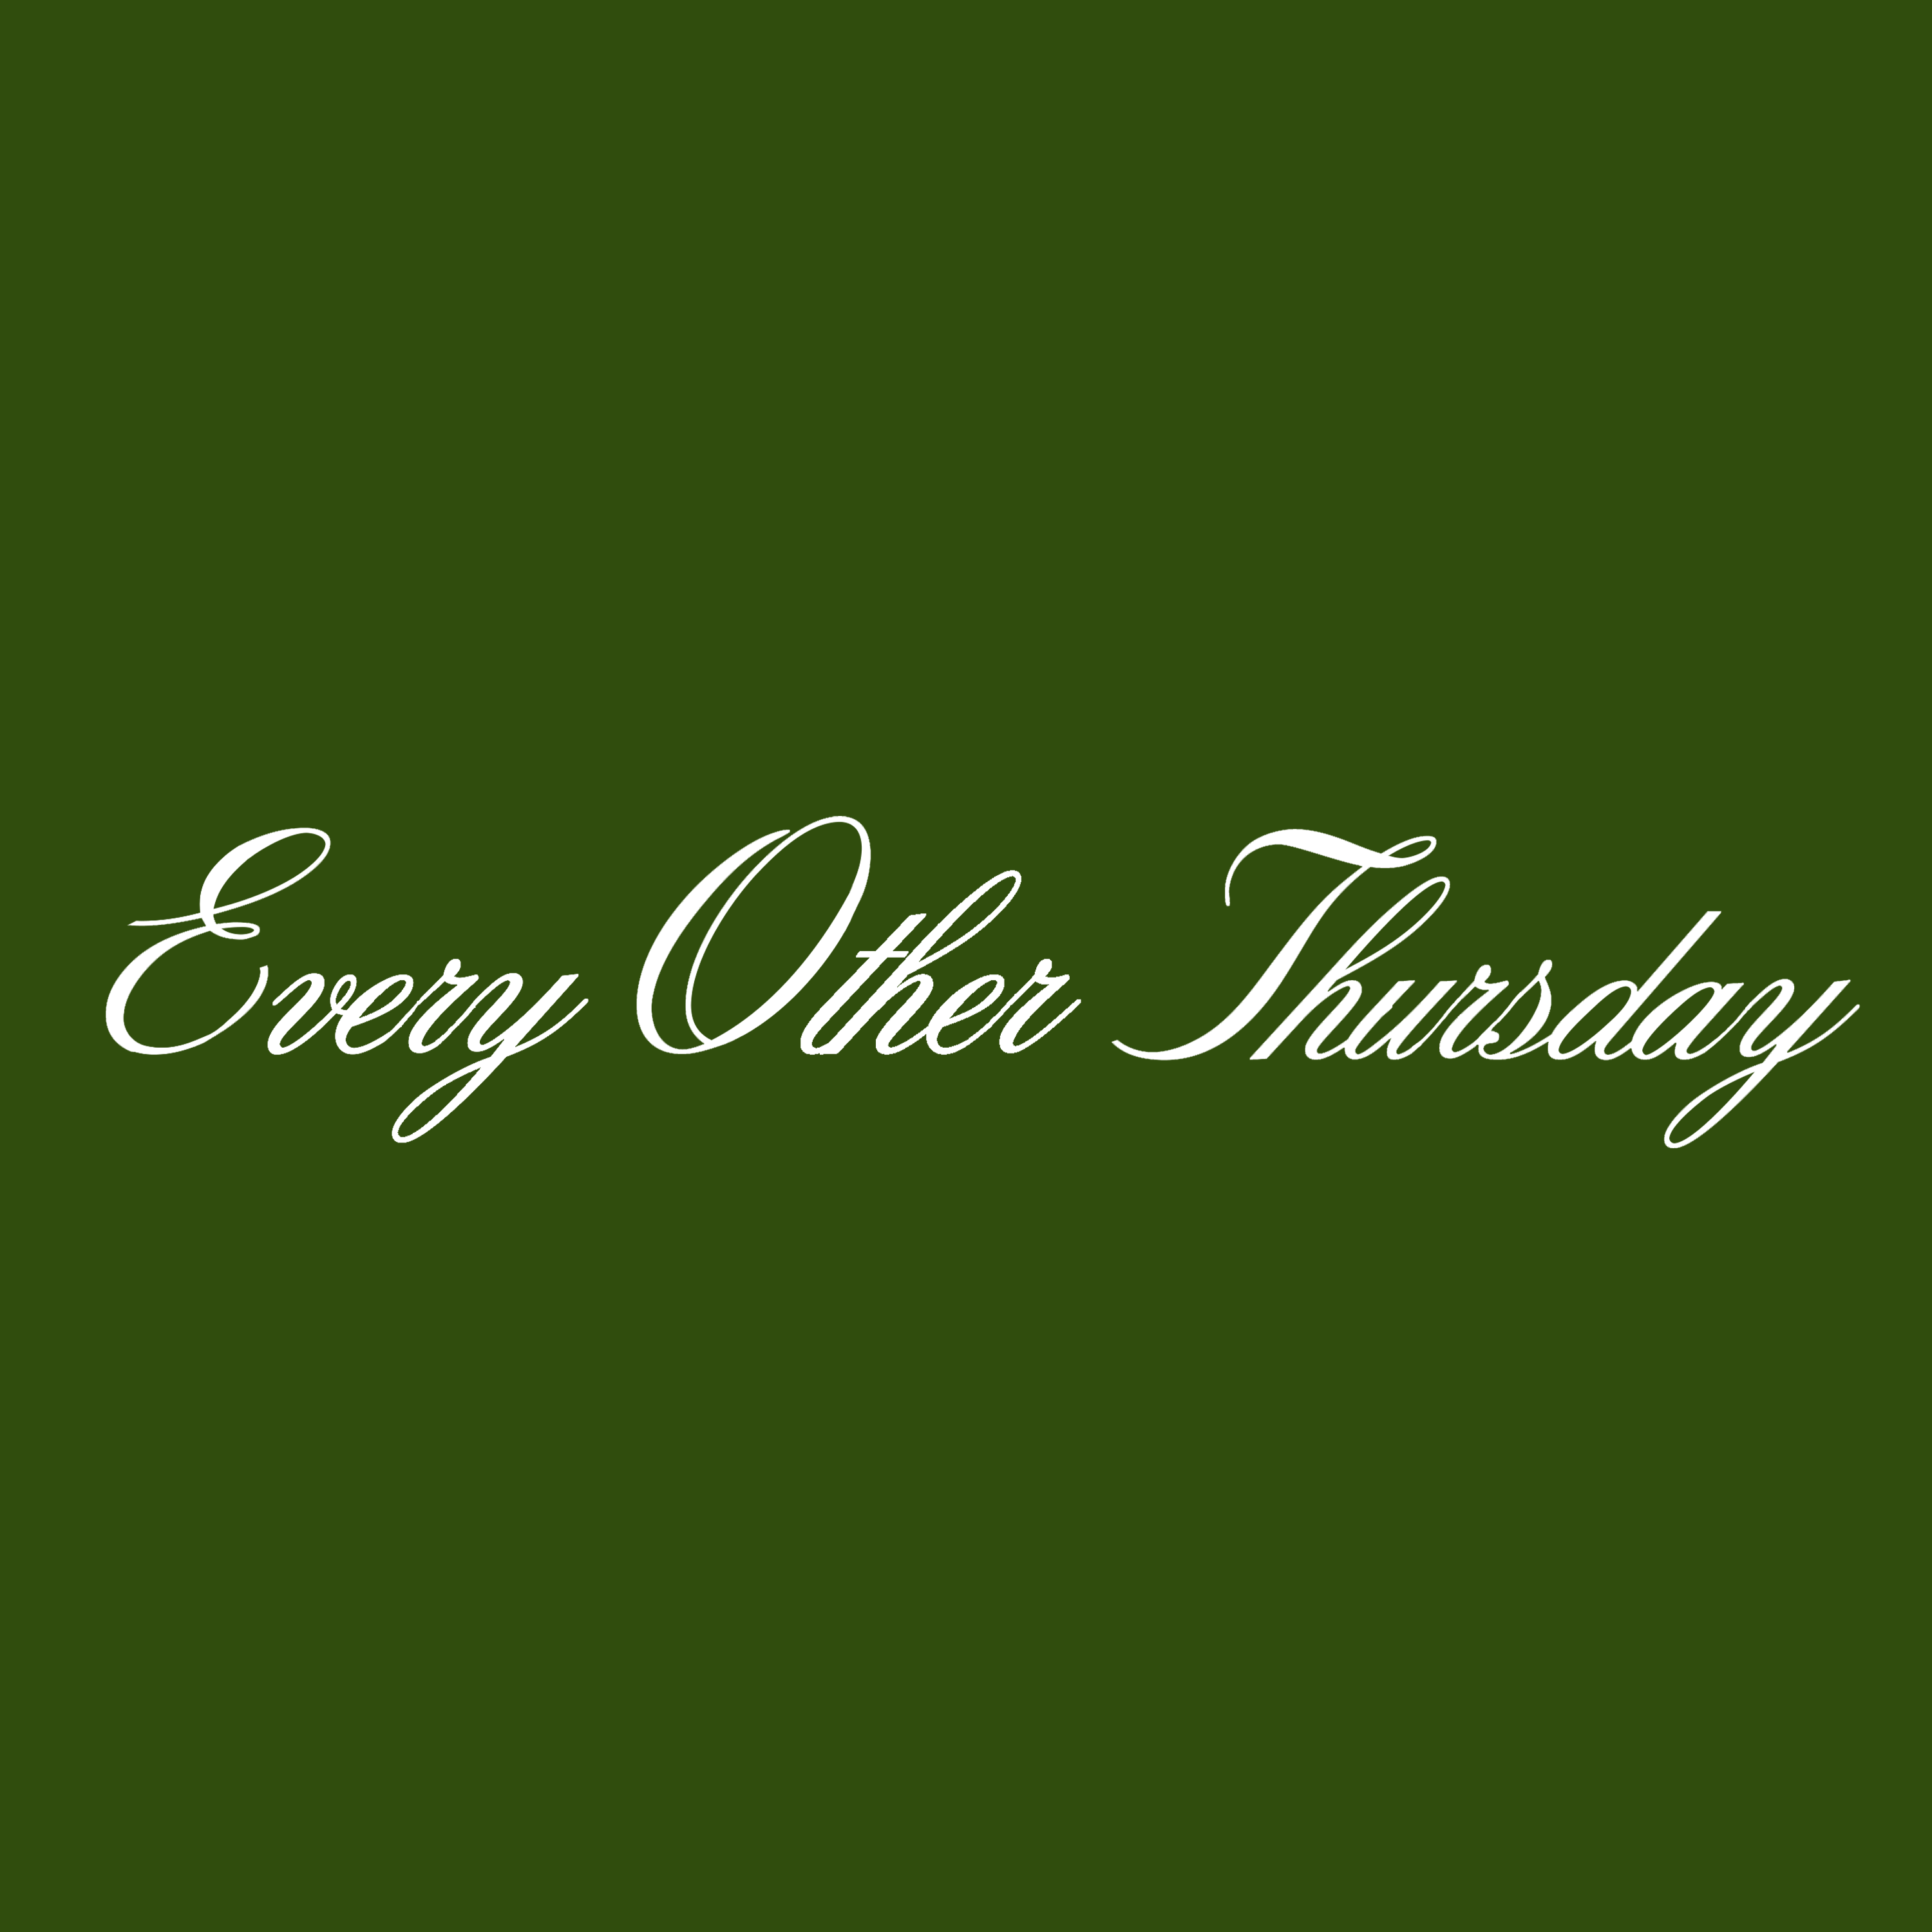 All – Every Other Thursday